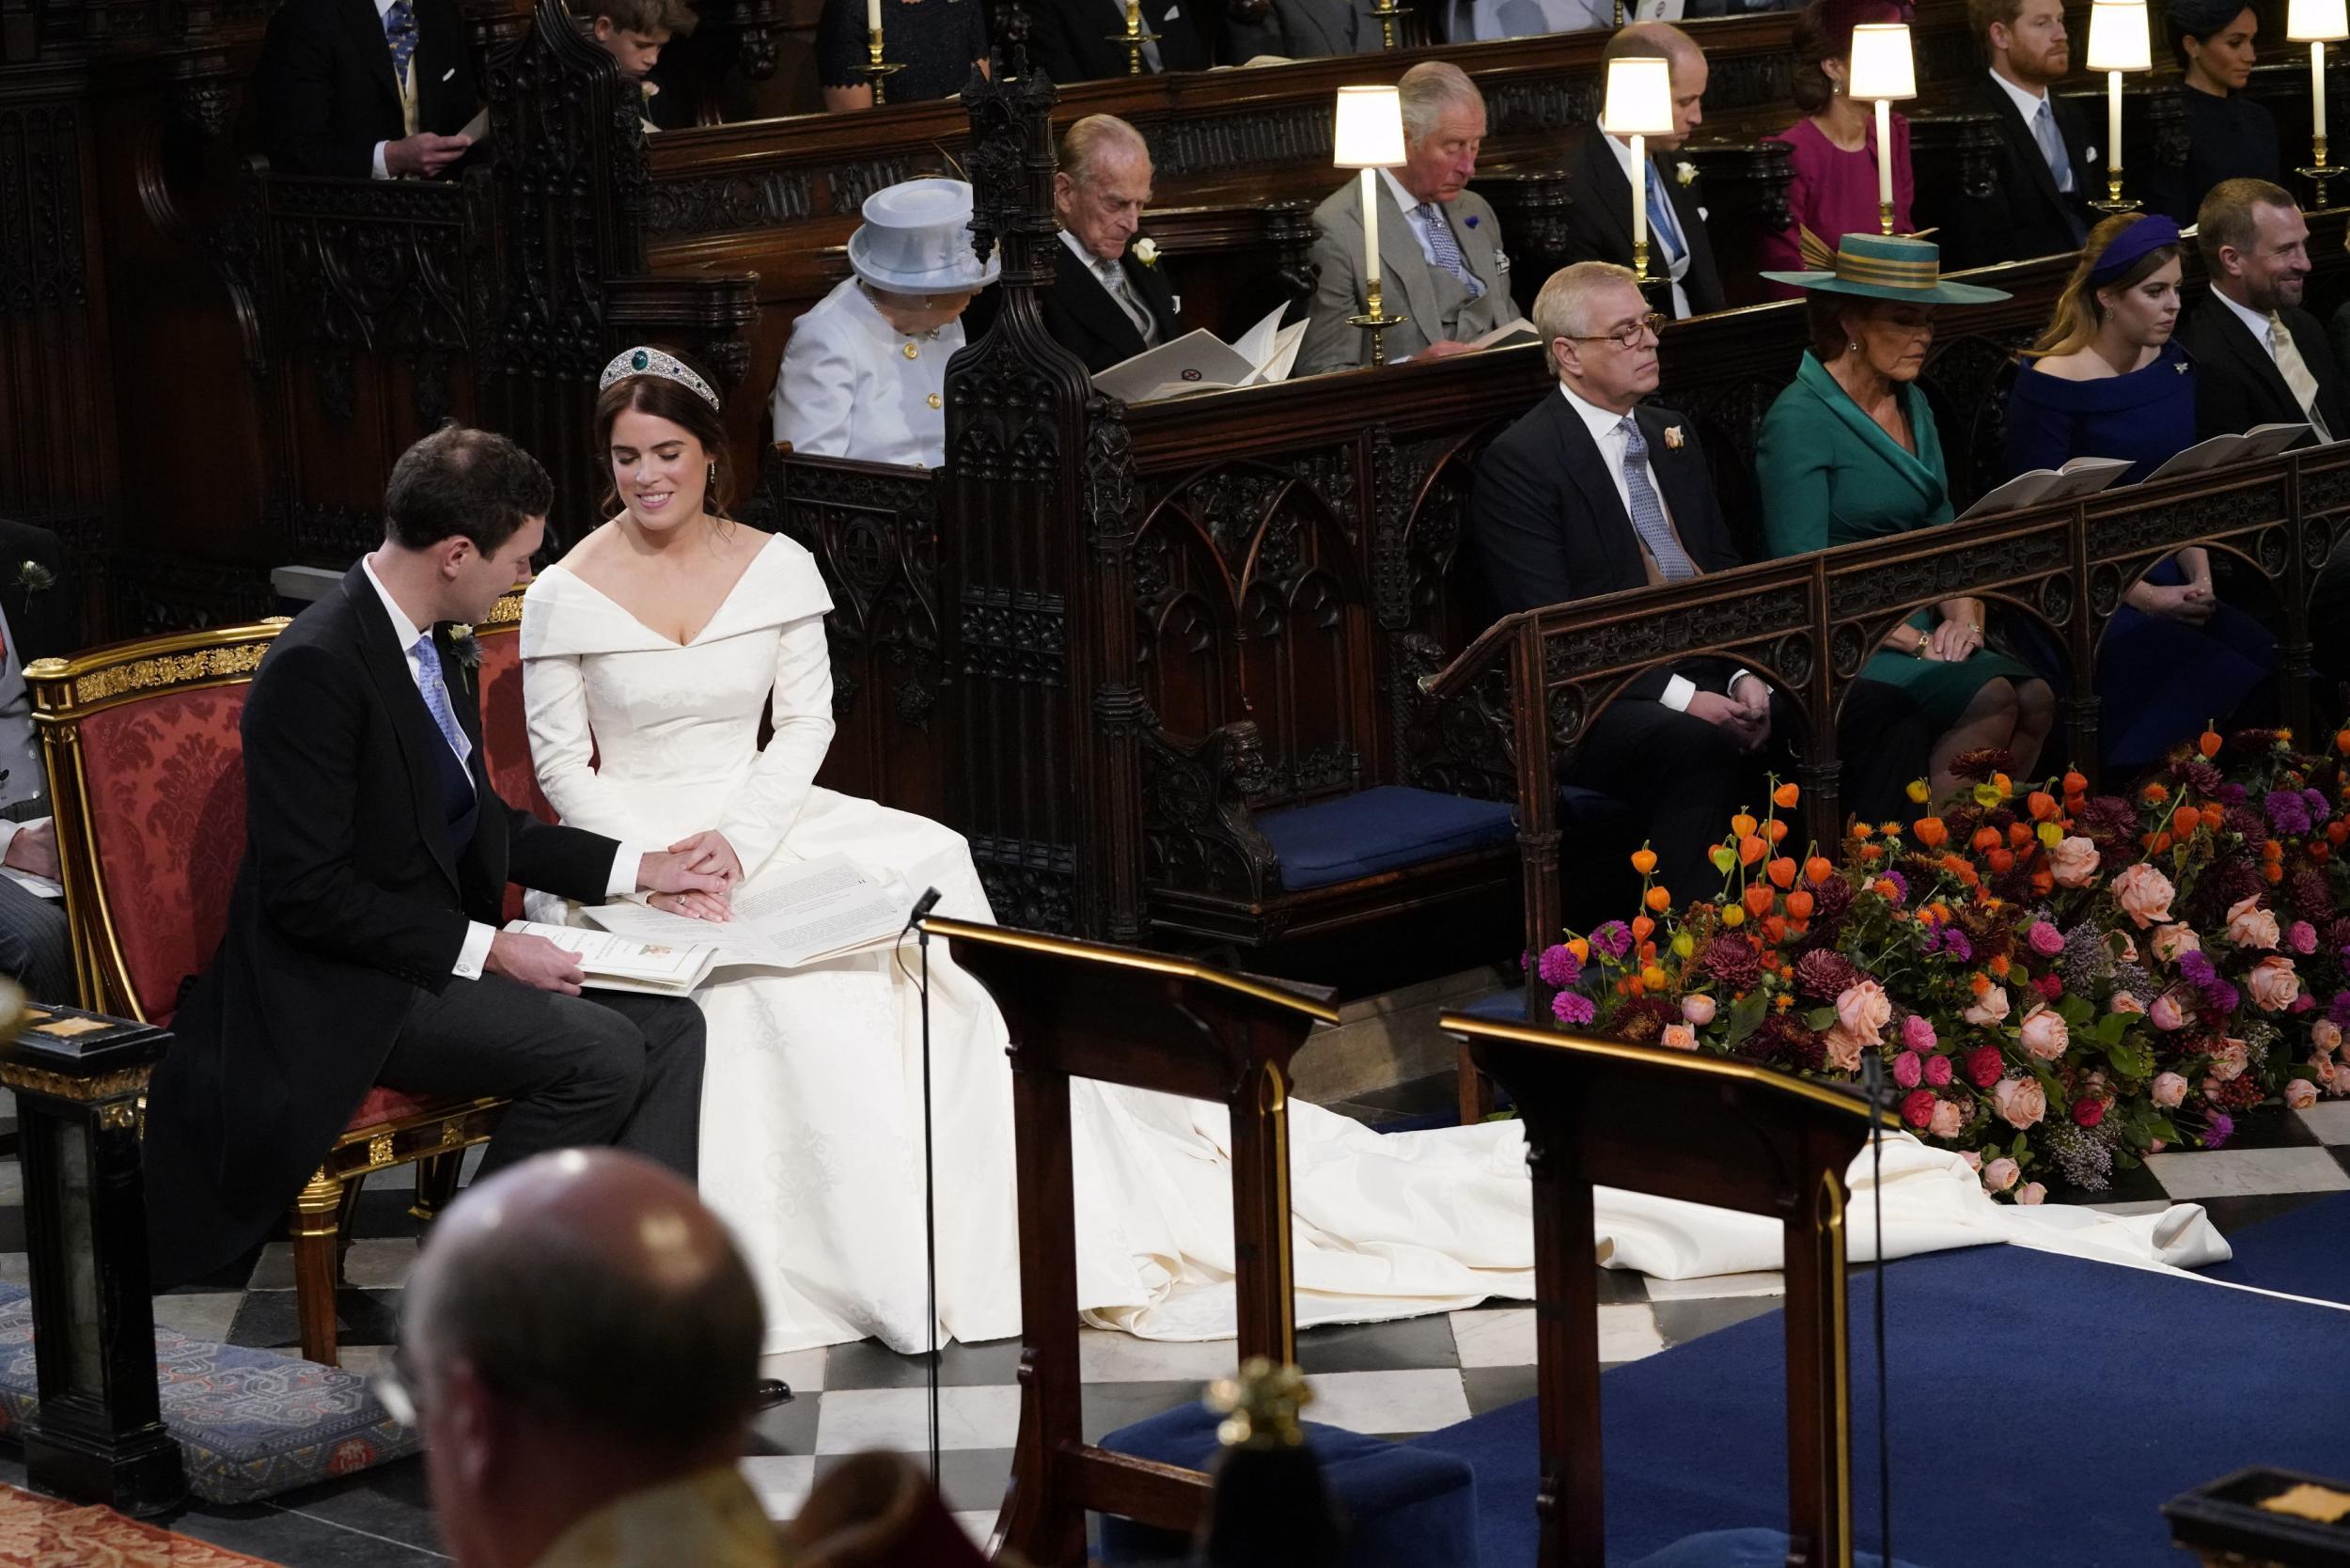 The Queen sat in the second row during the ceremony (Getty)